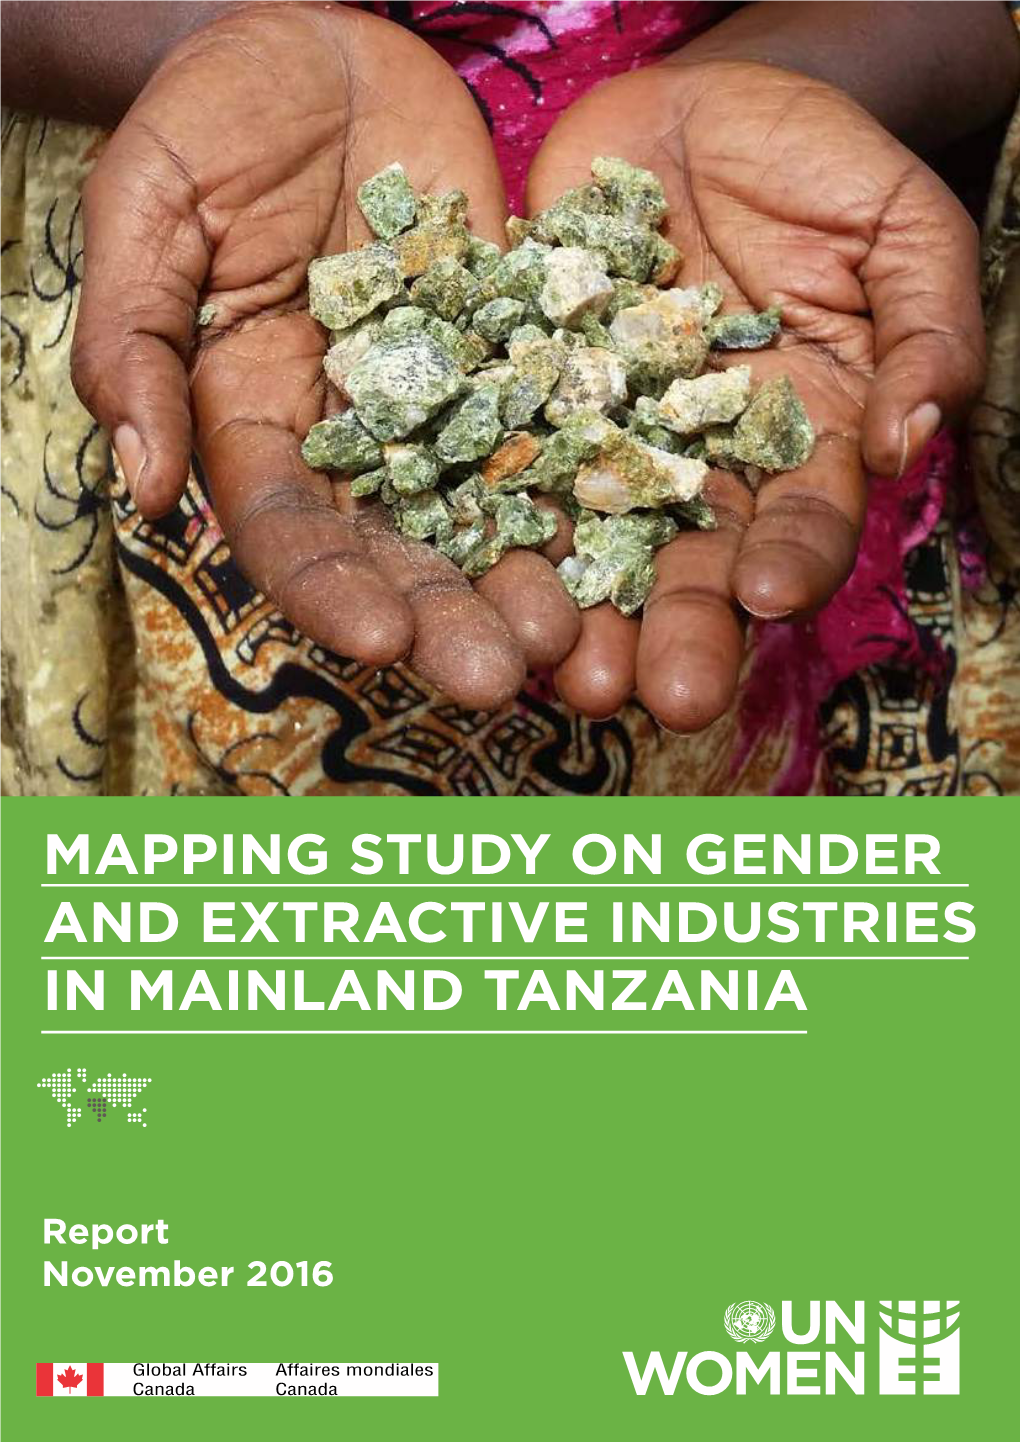 Mapping Study on Gender and Extractive Industries in Mainland Tanzania